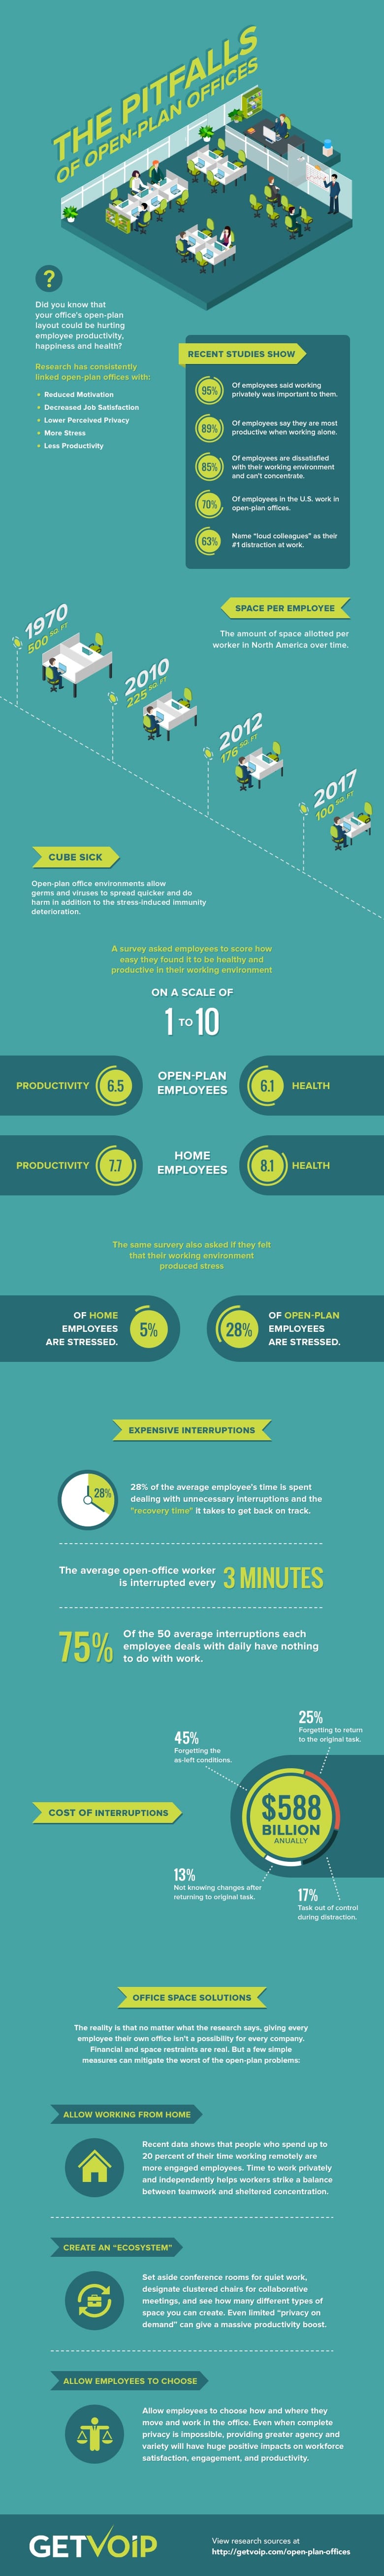 open-plan-offices-infographic